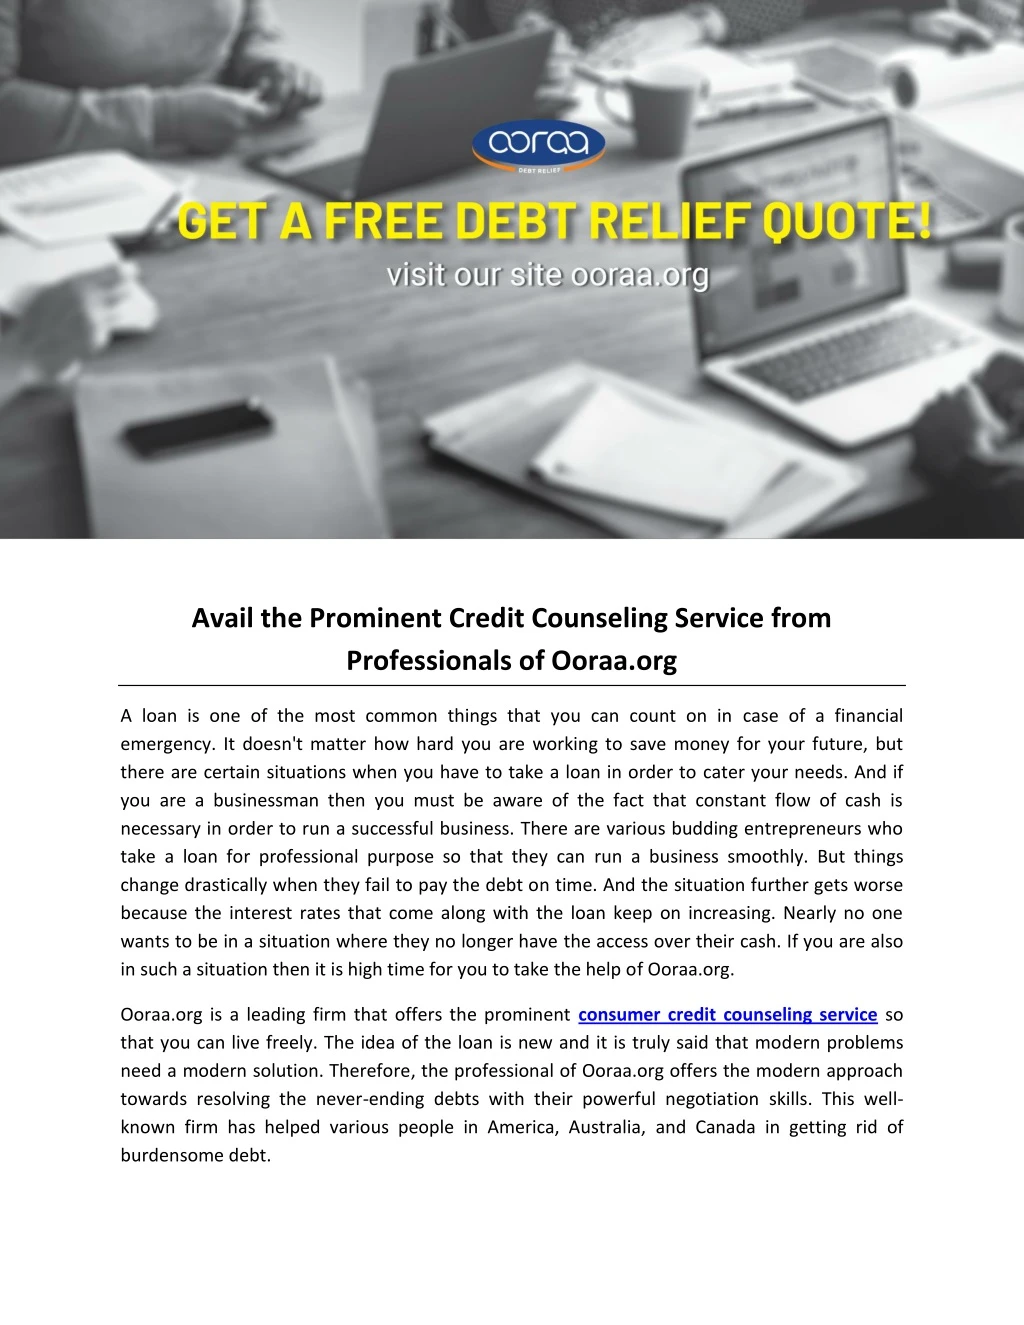 avail the prominent credit counseling service